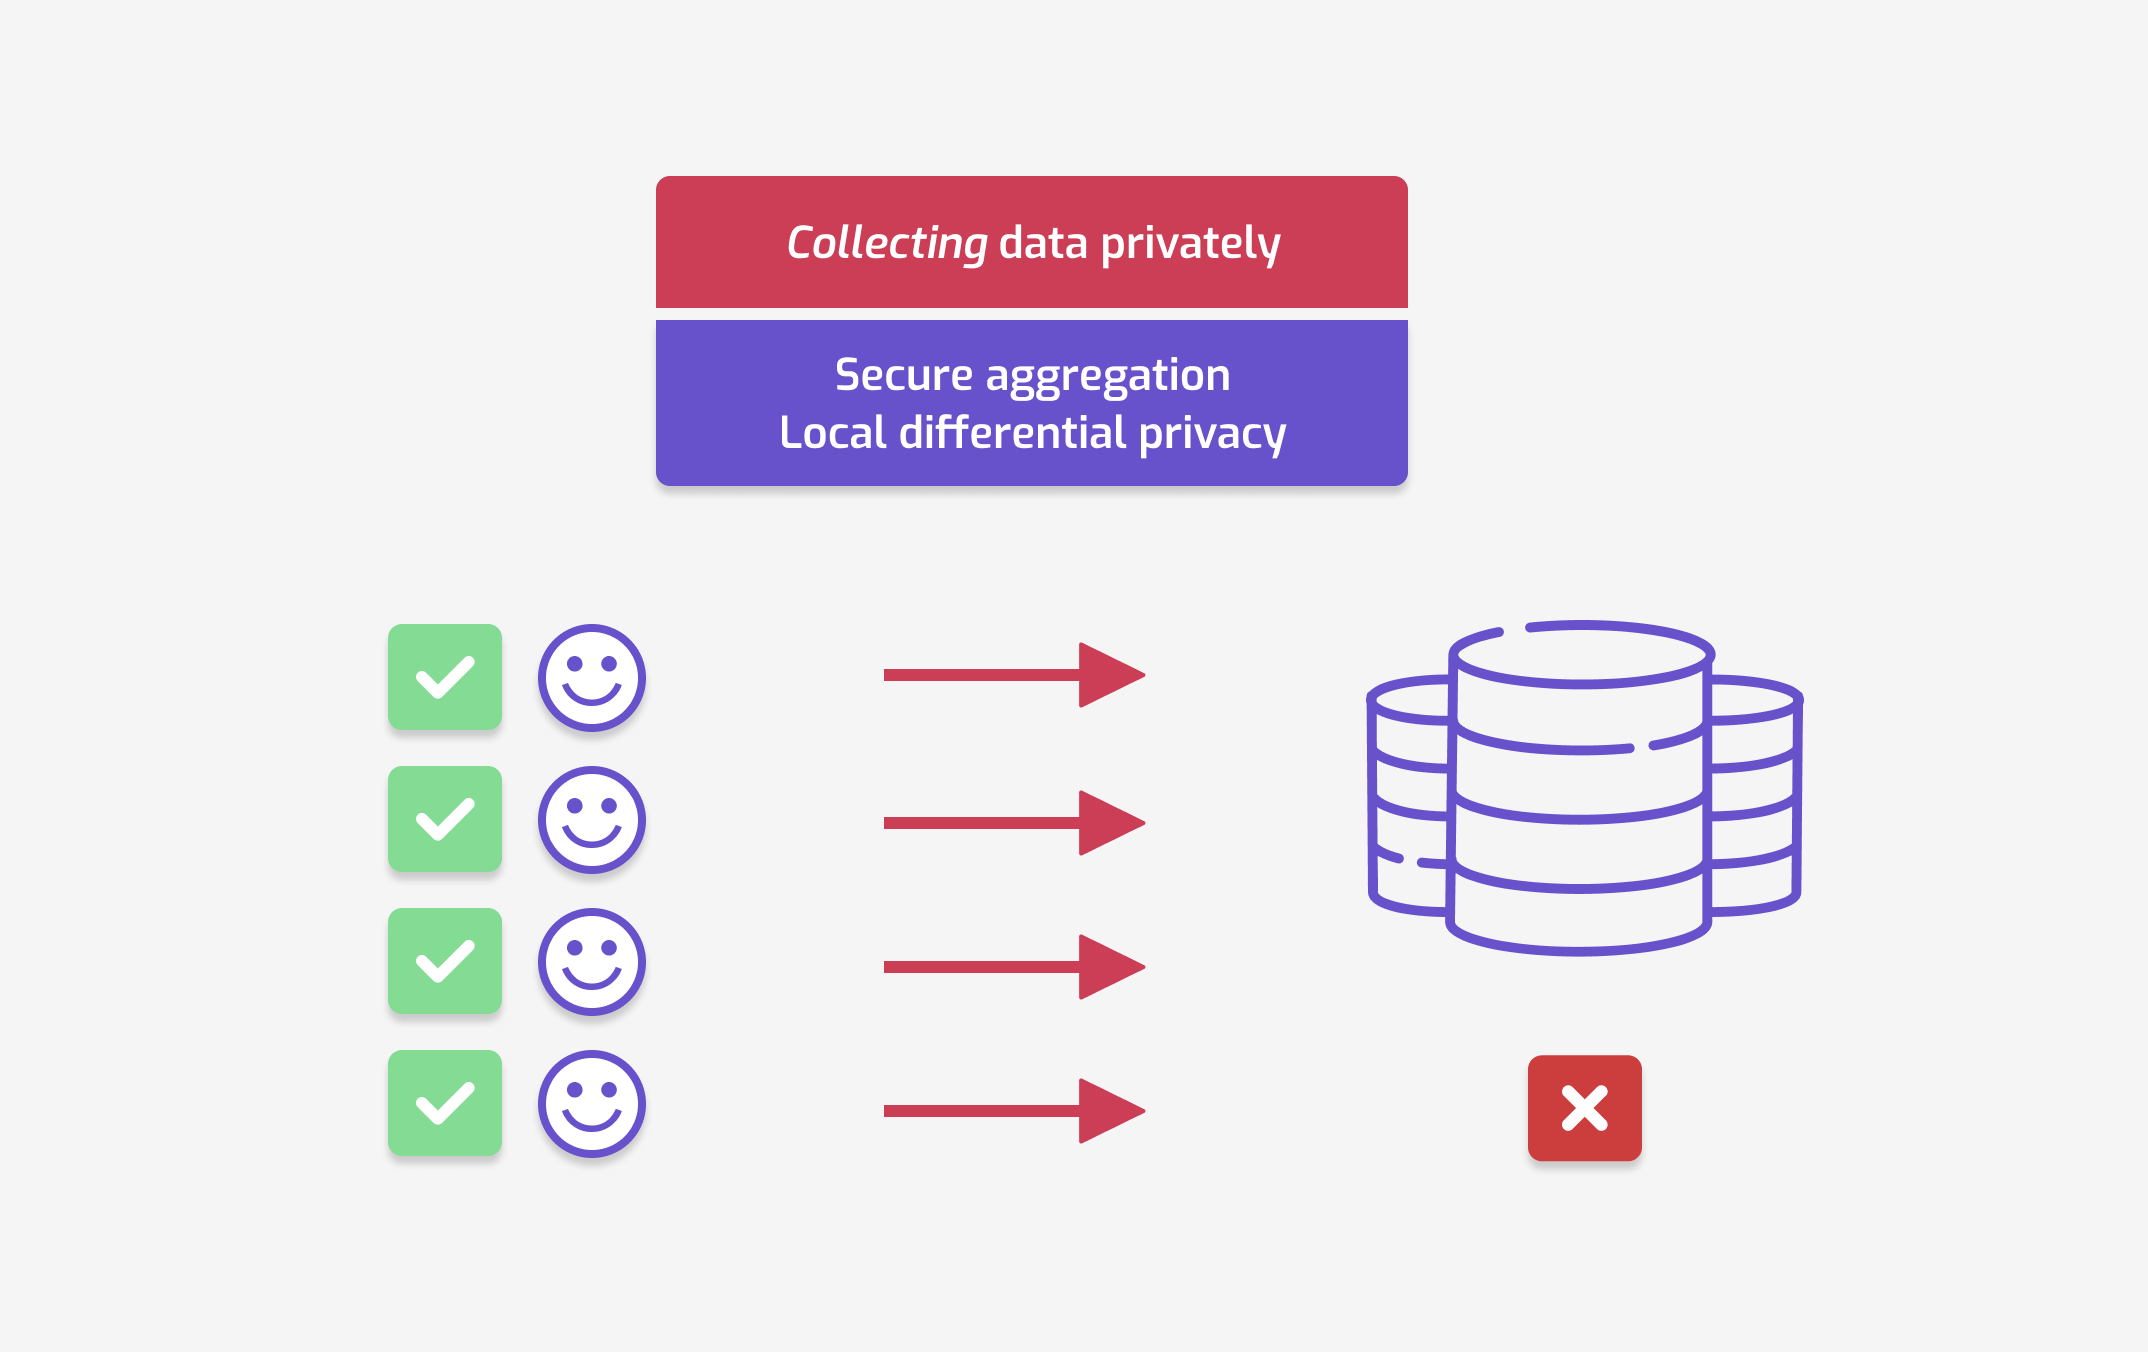 A diagram representing private data collection. Four smiley faces representing
users are on the left, and each has an arrow pointing to a database icon on the
right. Green check marks are next to each smiley face, and a "forbidden" sign is
next to the database icon. The diagram is labeled "Collecting data privately:
secure aggregation, local differential
privacy"